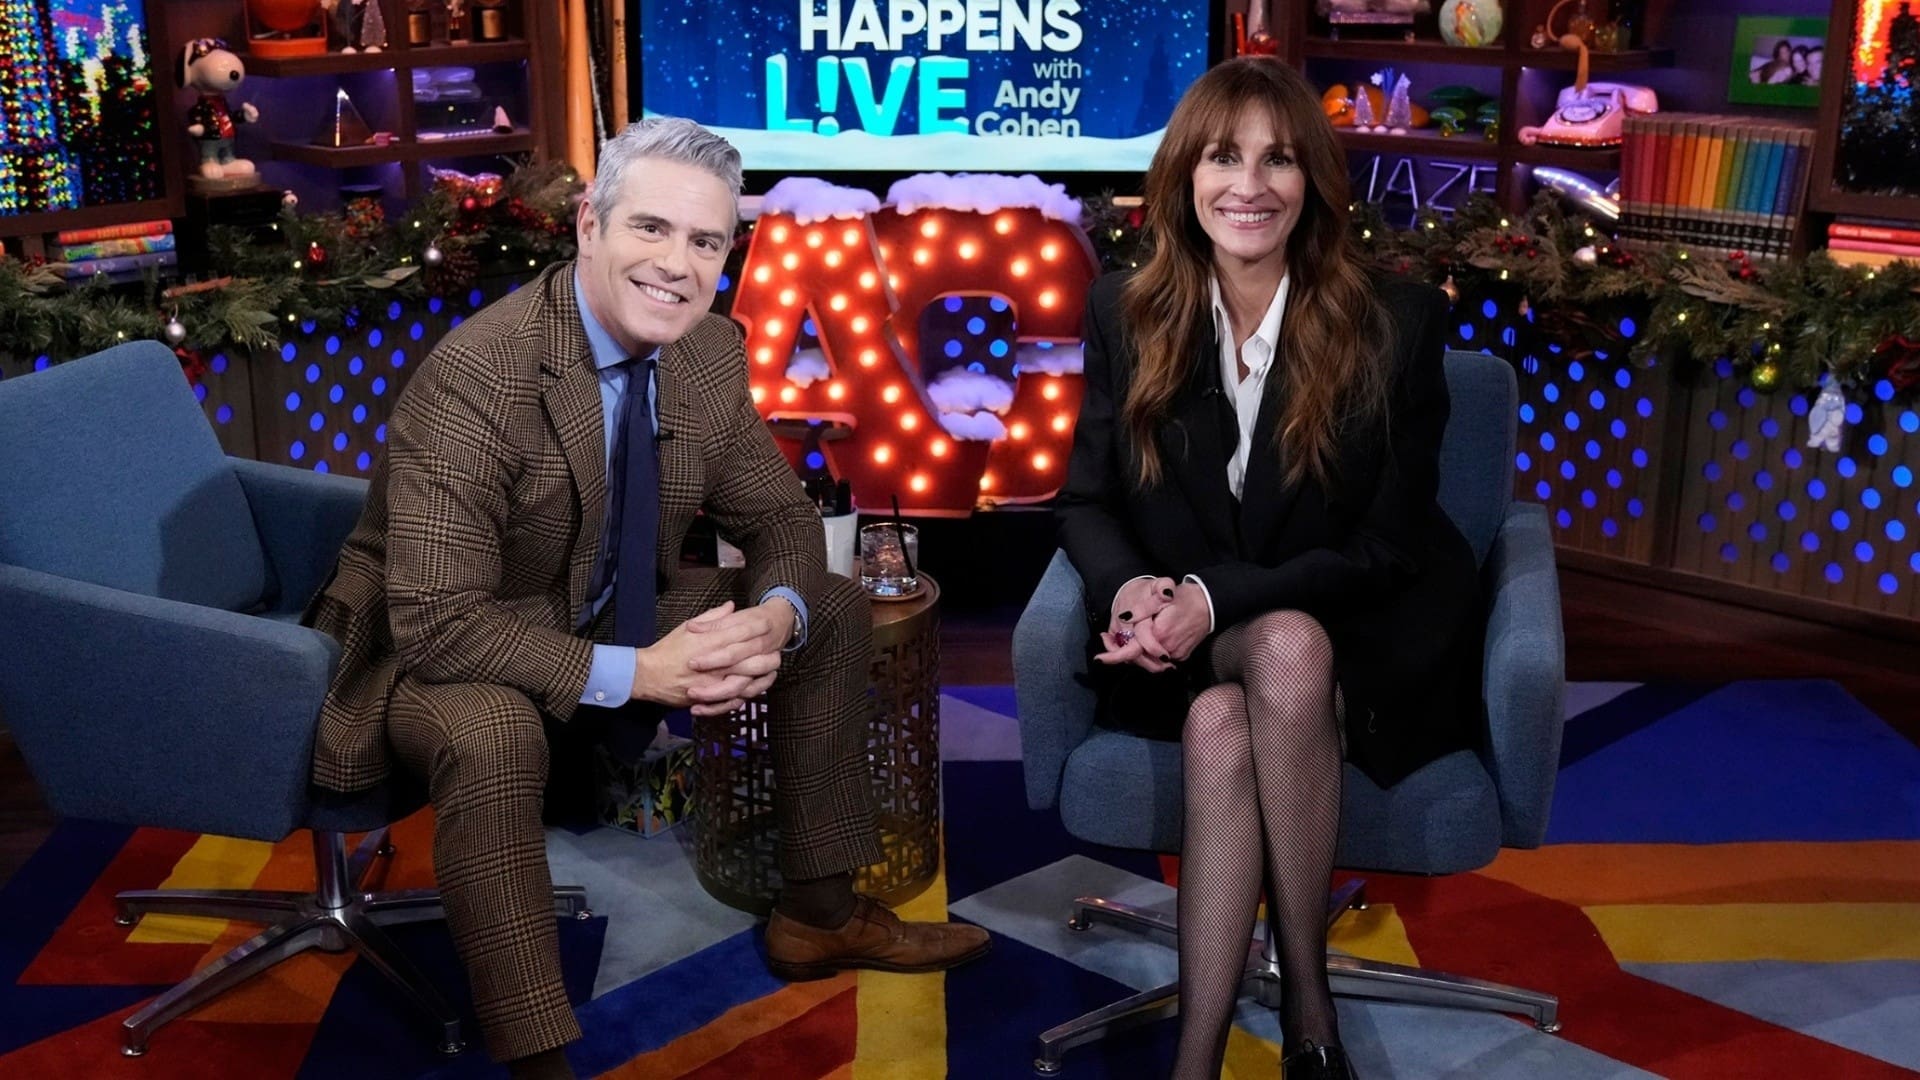 Watch What Happens Live with Andy Cohen - Staffel 20 Folge 196 (1970)